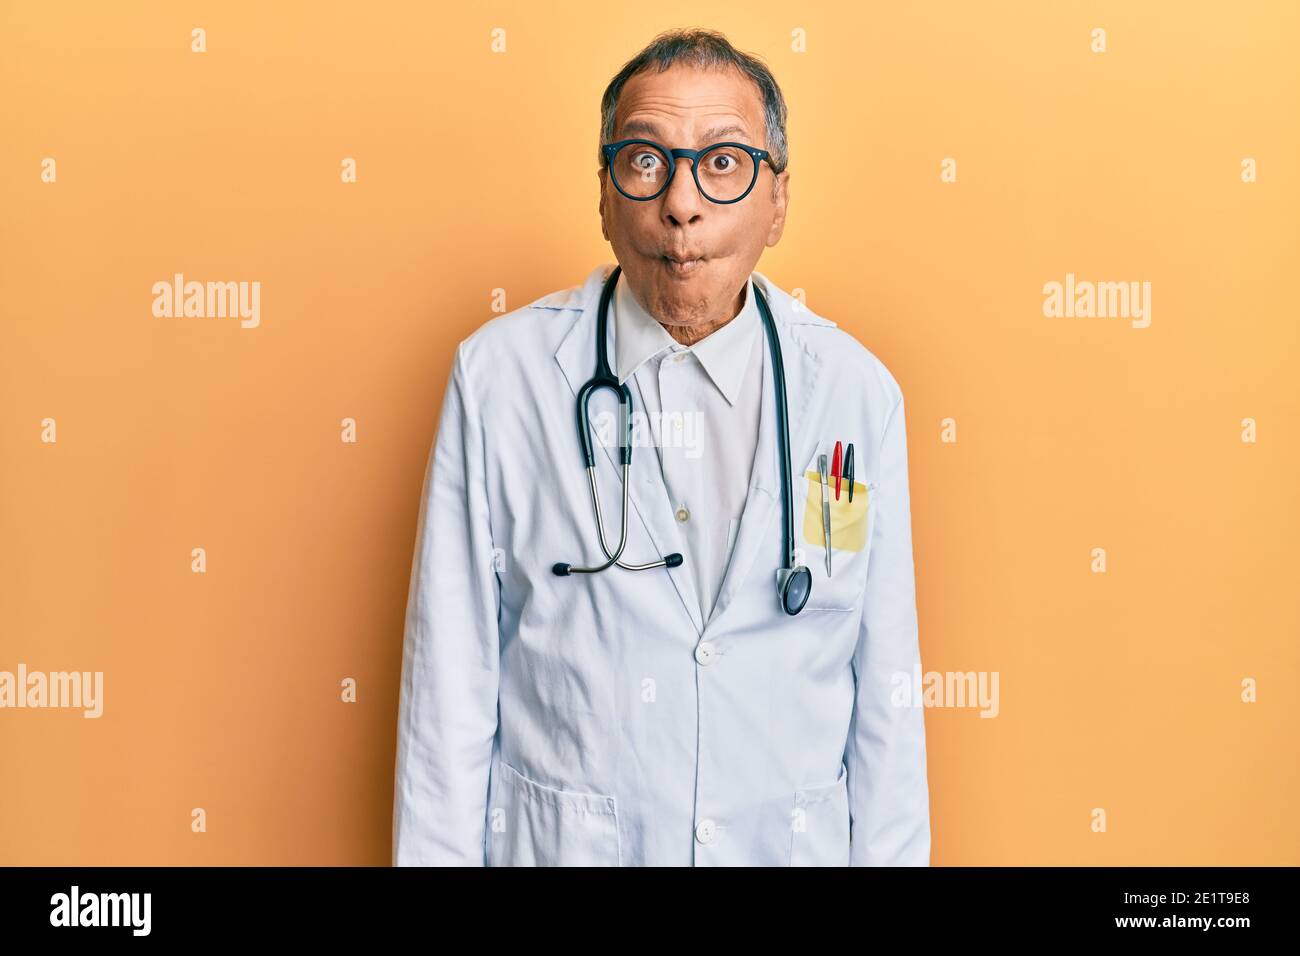 Middle age indian man wearing doctor coat and stethoscope making fish face  with lips, crazy and comical gesture. funny expression Stock Photo - Alamy